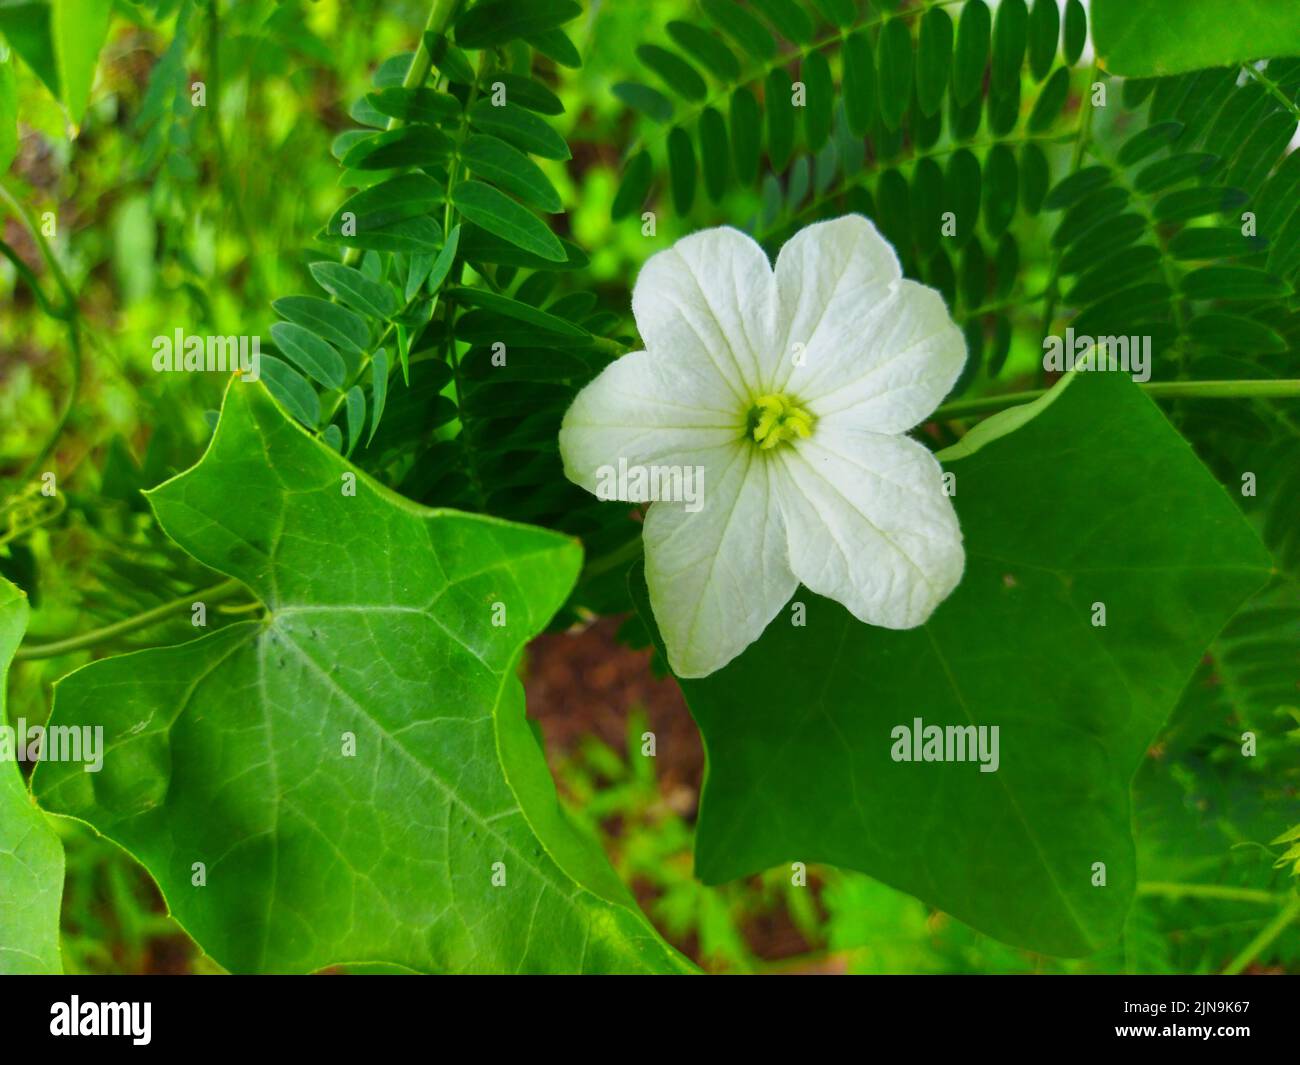 A White Cocciniagran flower are blooming Stock Photo